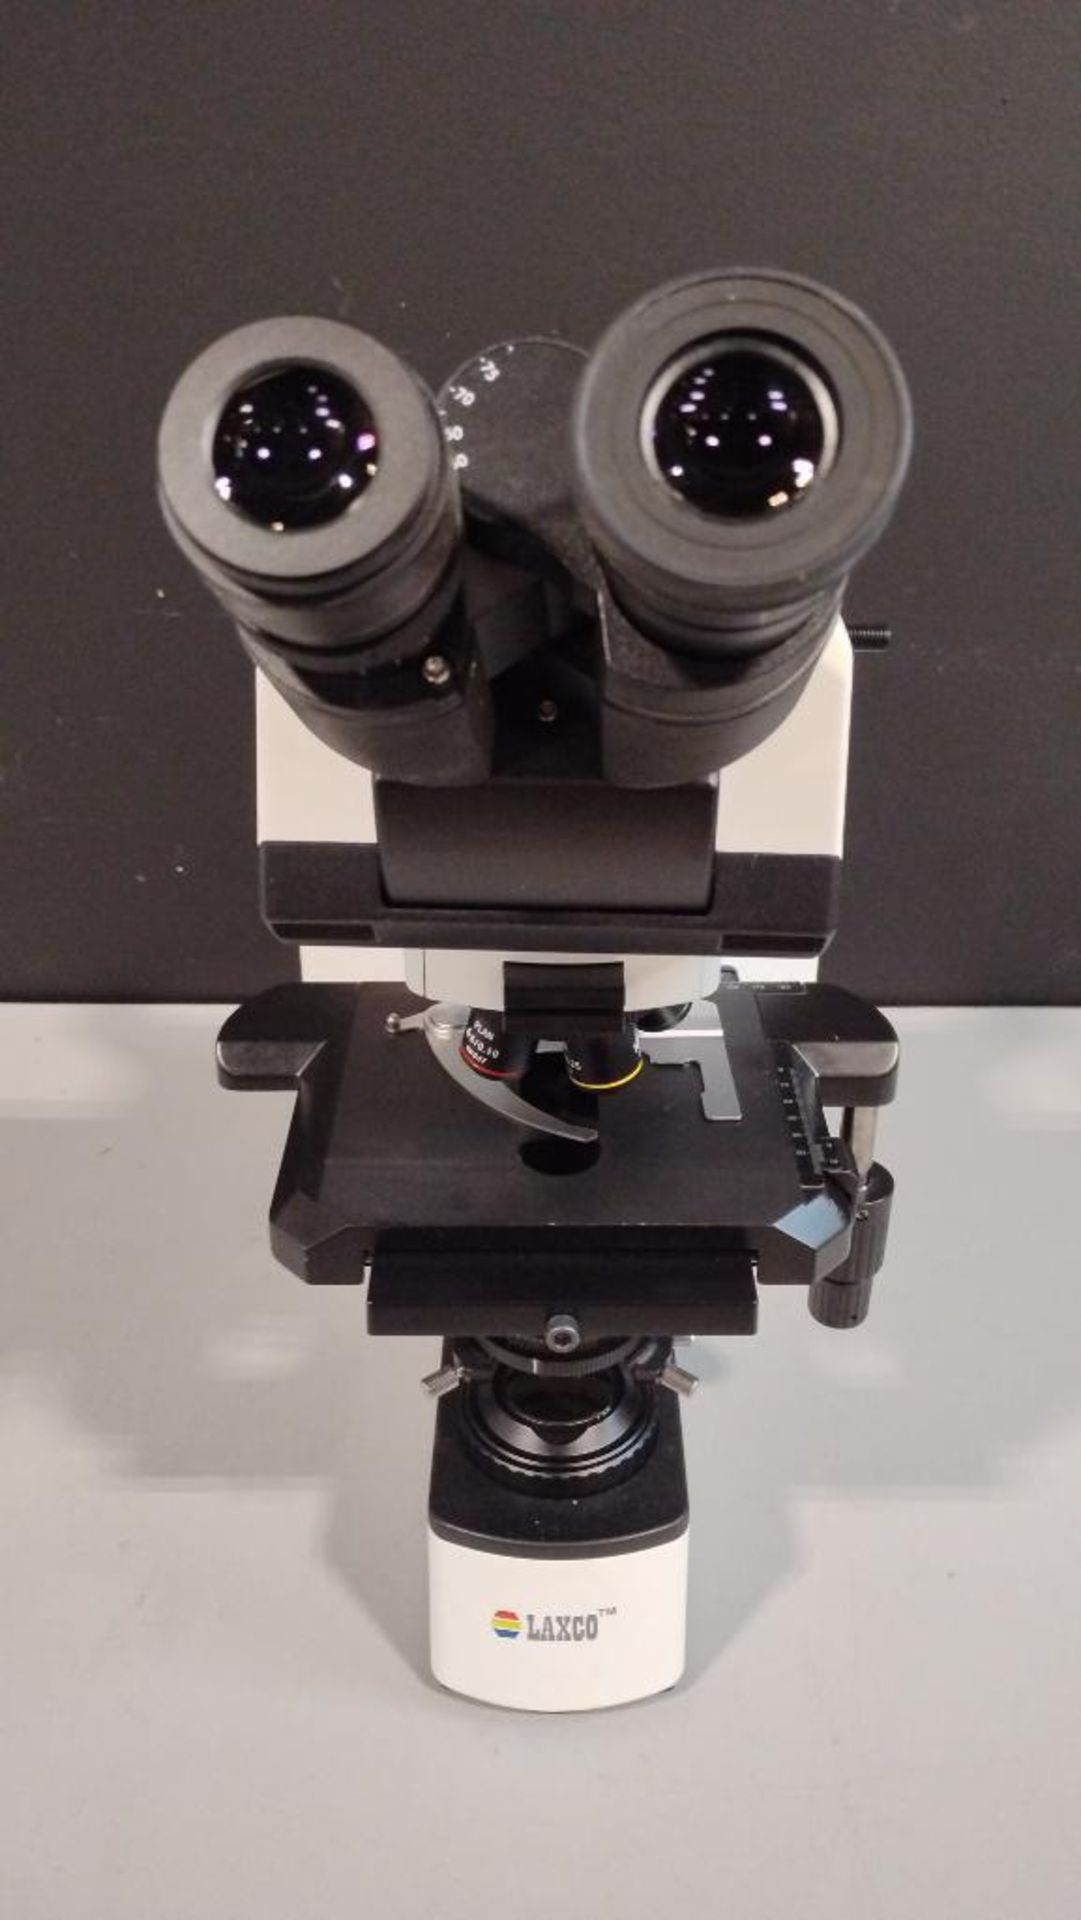 LAXCO LMC4-BF315 LAB MICROSCOPE WITH 4 OBJECTIVES